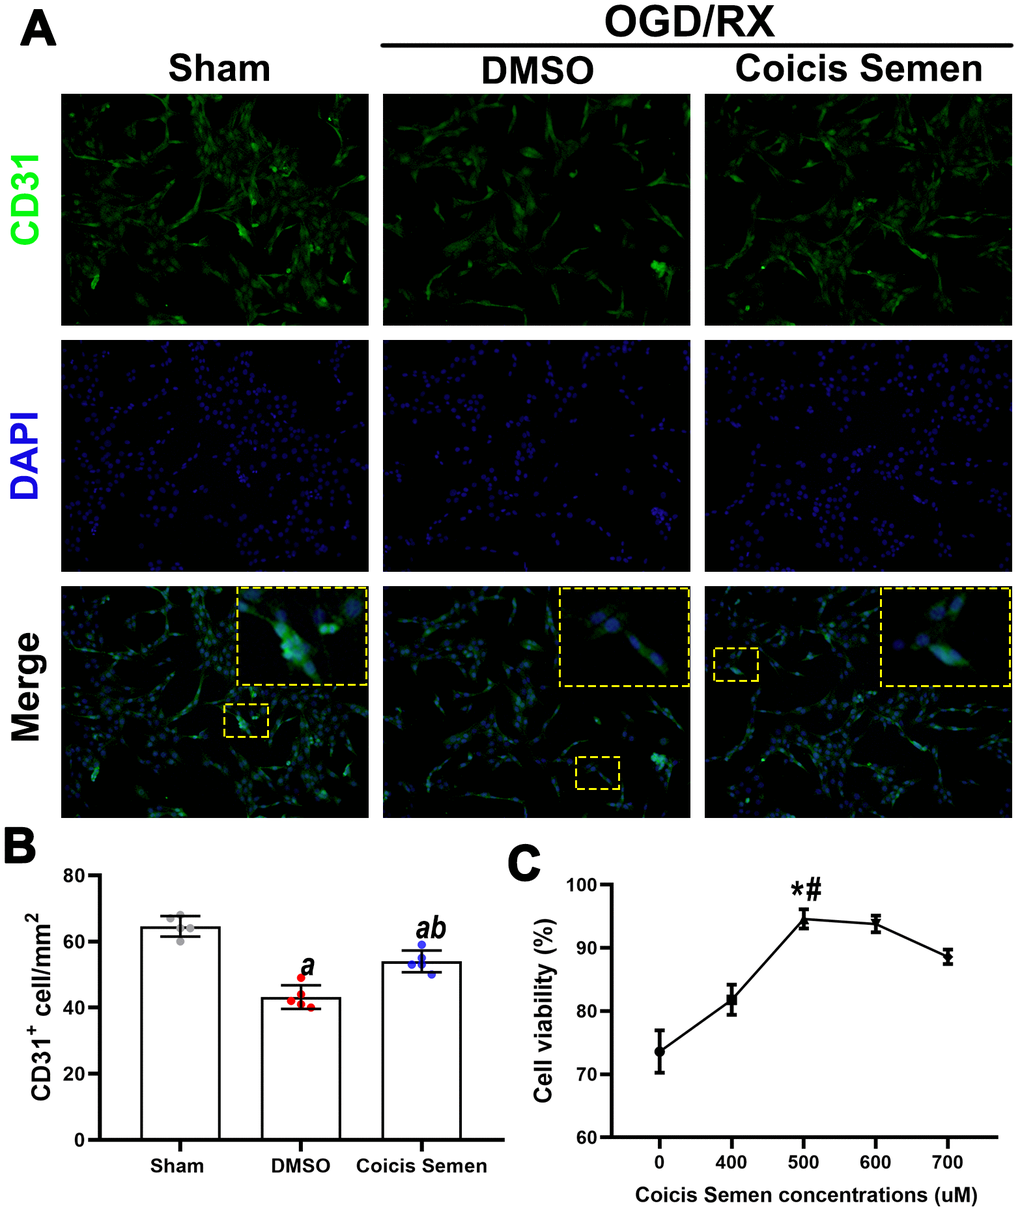 Coicis semen increased cell viability in HUVECs after OGD/RX. (A) Representative imaging showing CD31 detection in HUVECs after OGD/RX by using immunofluorescence staining. Mean ± SD. n = 5. aP bP B) Quantitative analysis of CD31-positive cells. (C) Quantitative analysis of cell viability in cells treated with Coicis Semen at different doses. Mean ± SD. n = 5. aP bP P #P 